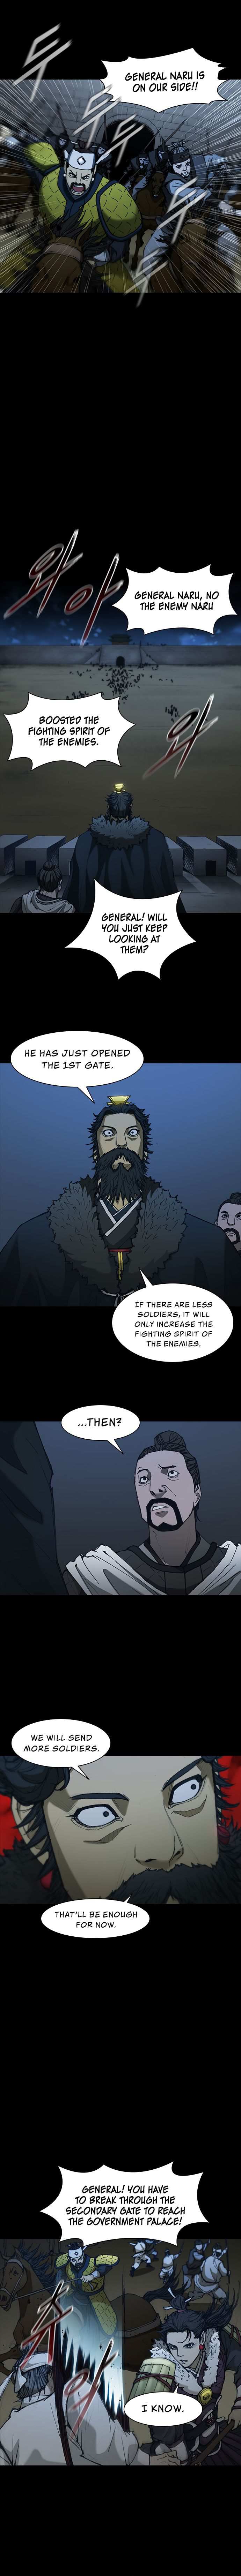 The Long Way Of The Warrior - Page 2